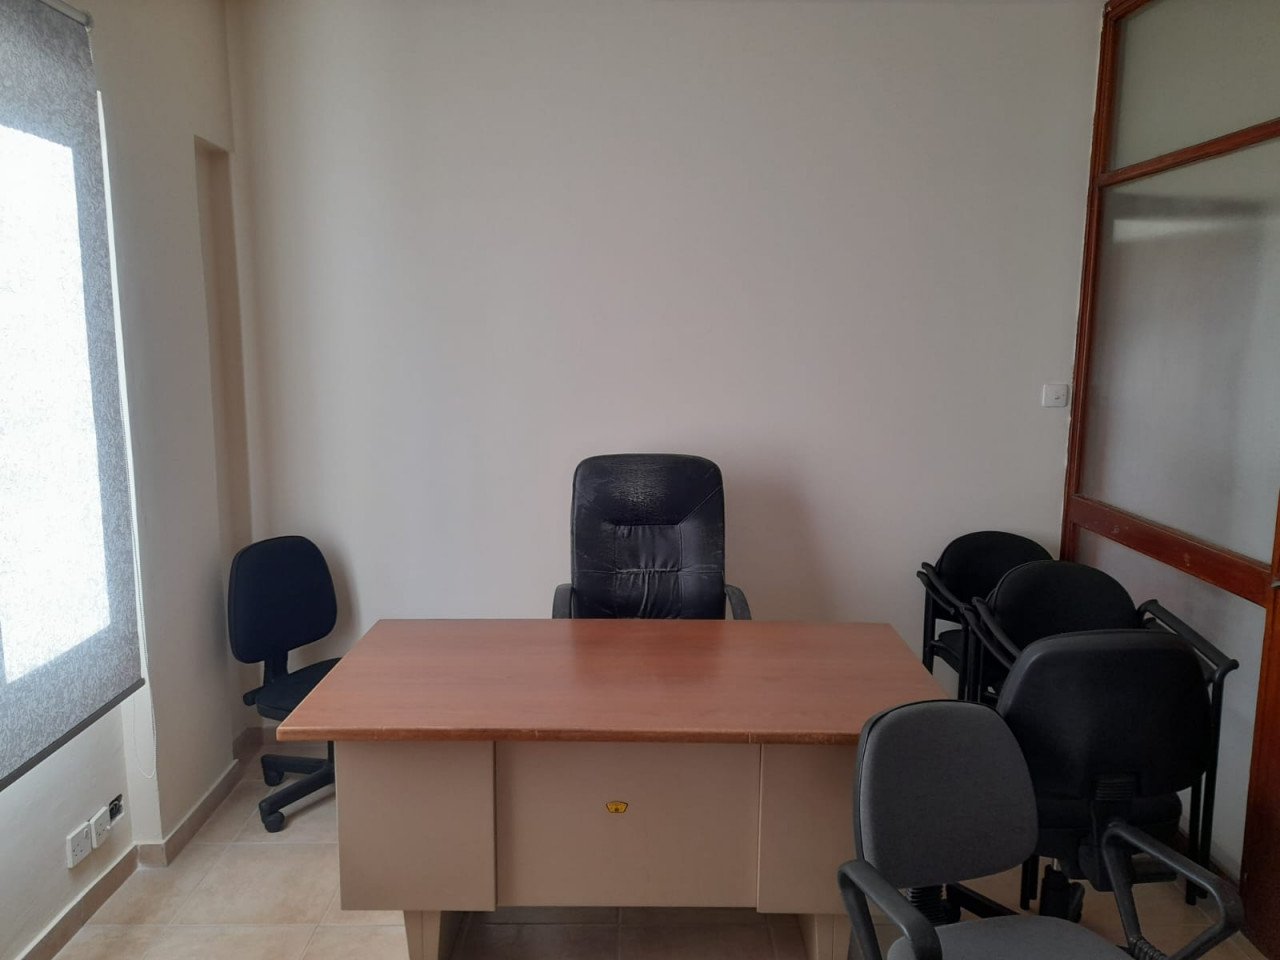 Property for Rent: Commercial (Office) in City Area, Nicosia for Rent | Key Realtor Cyprus